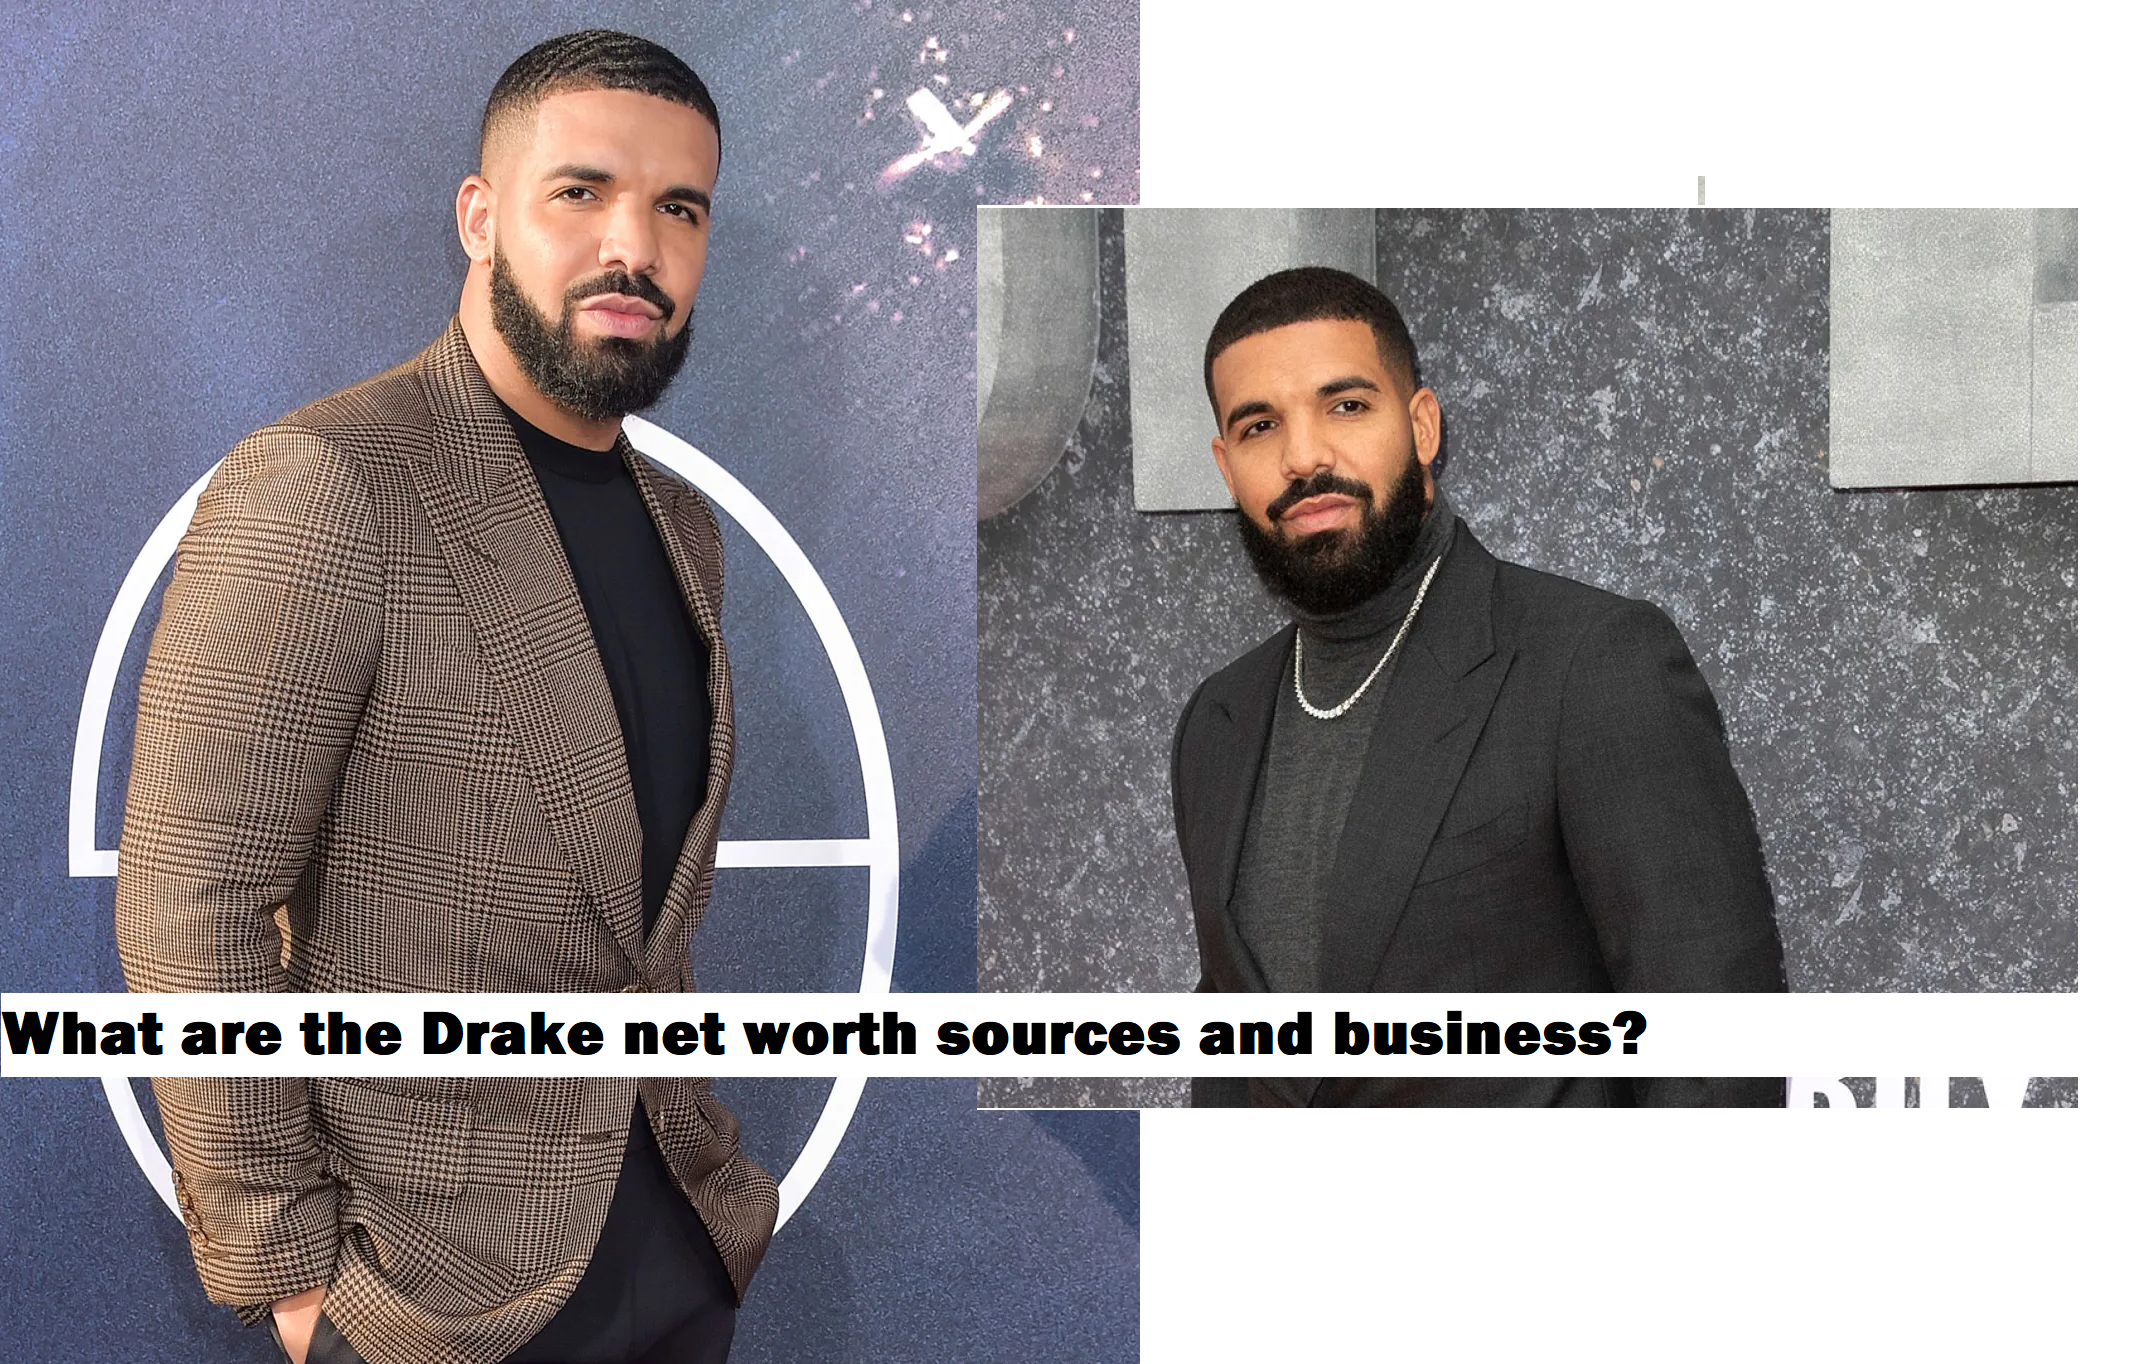 What are the Drake net worth sources and business?